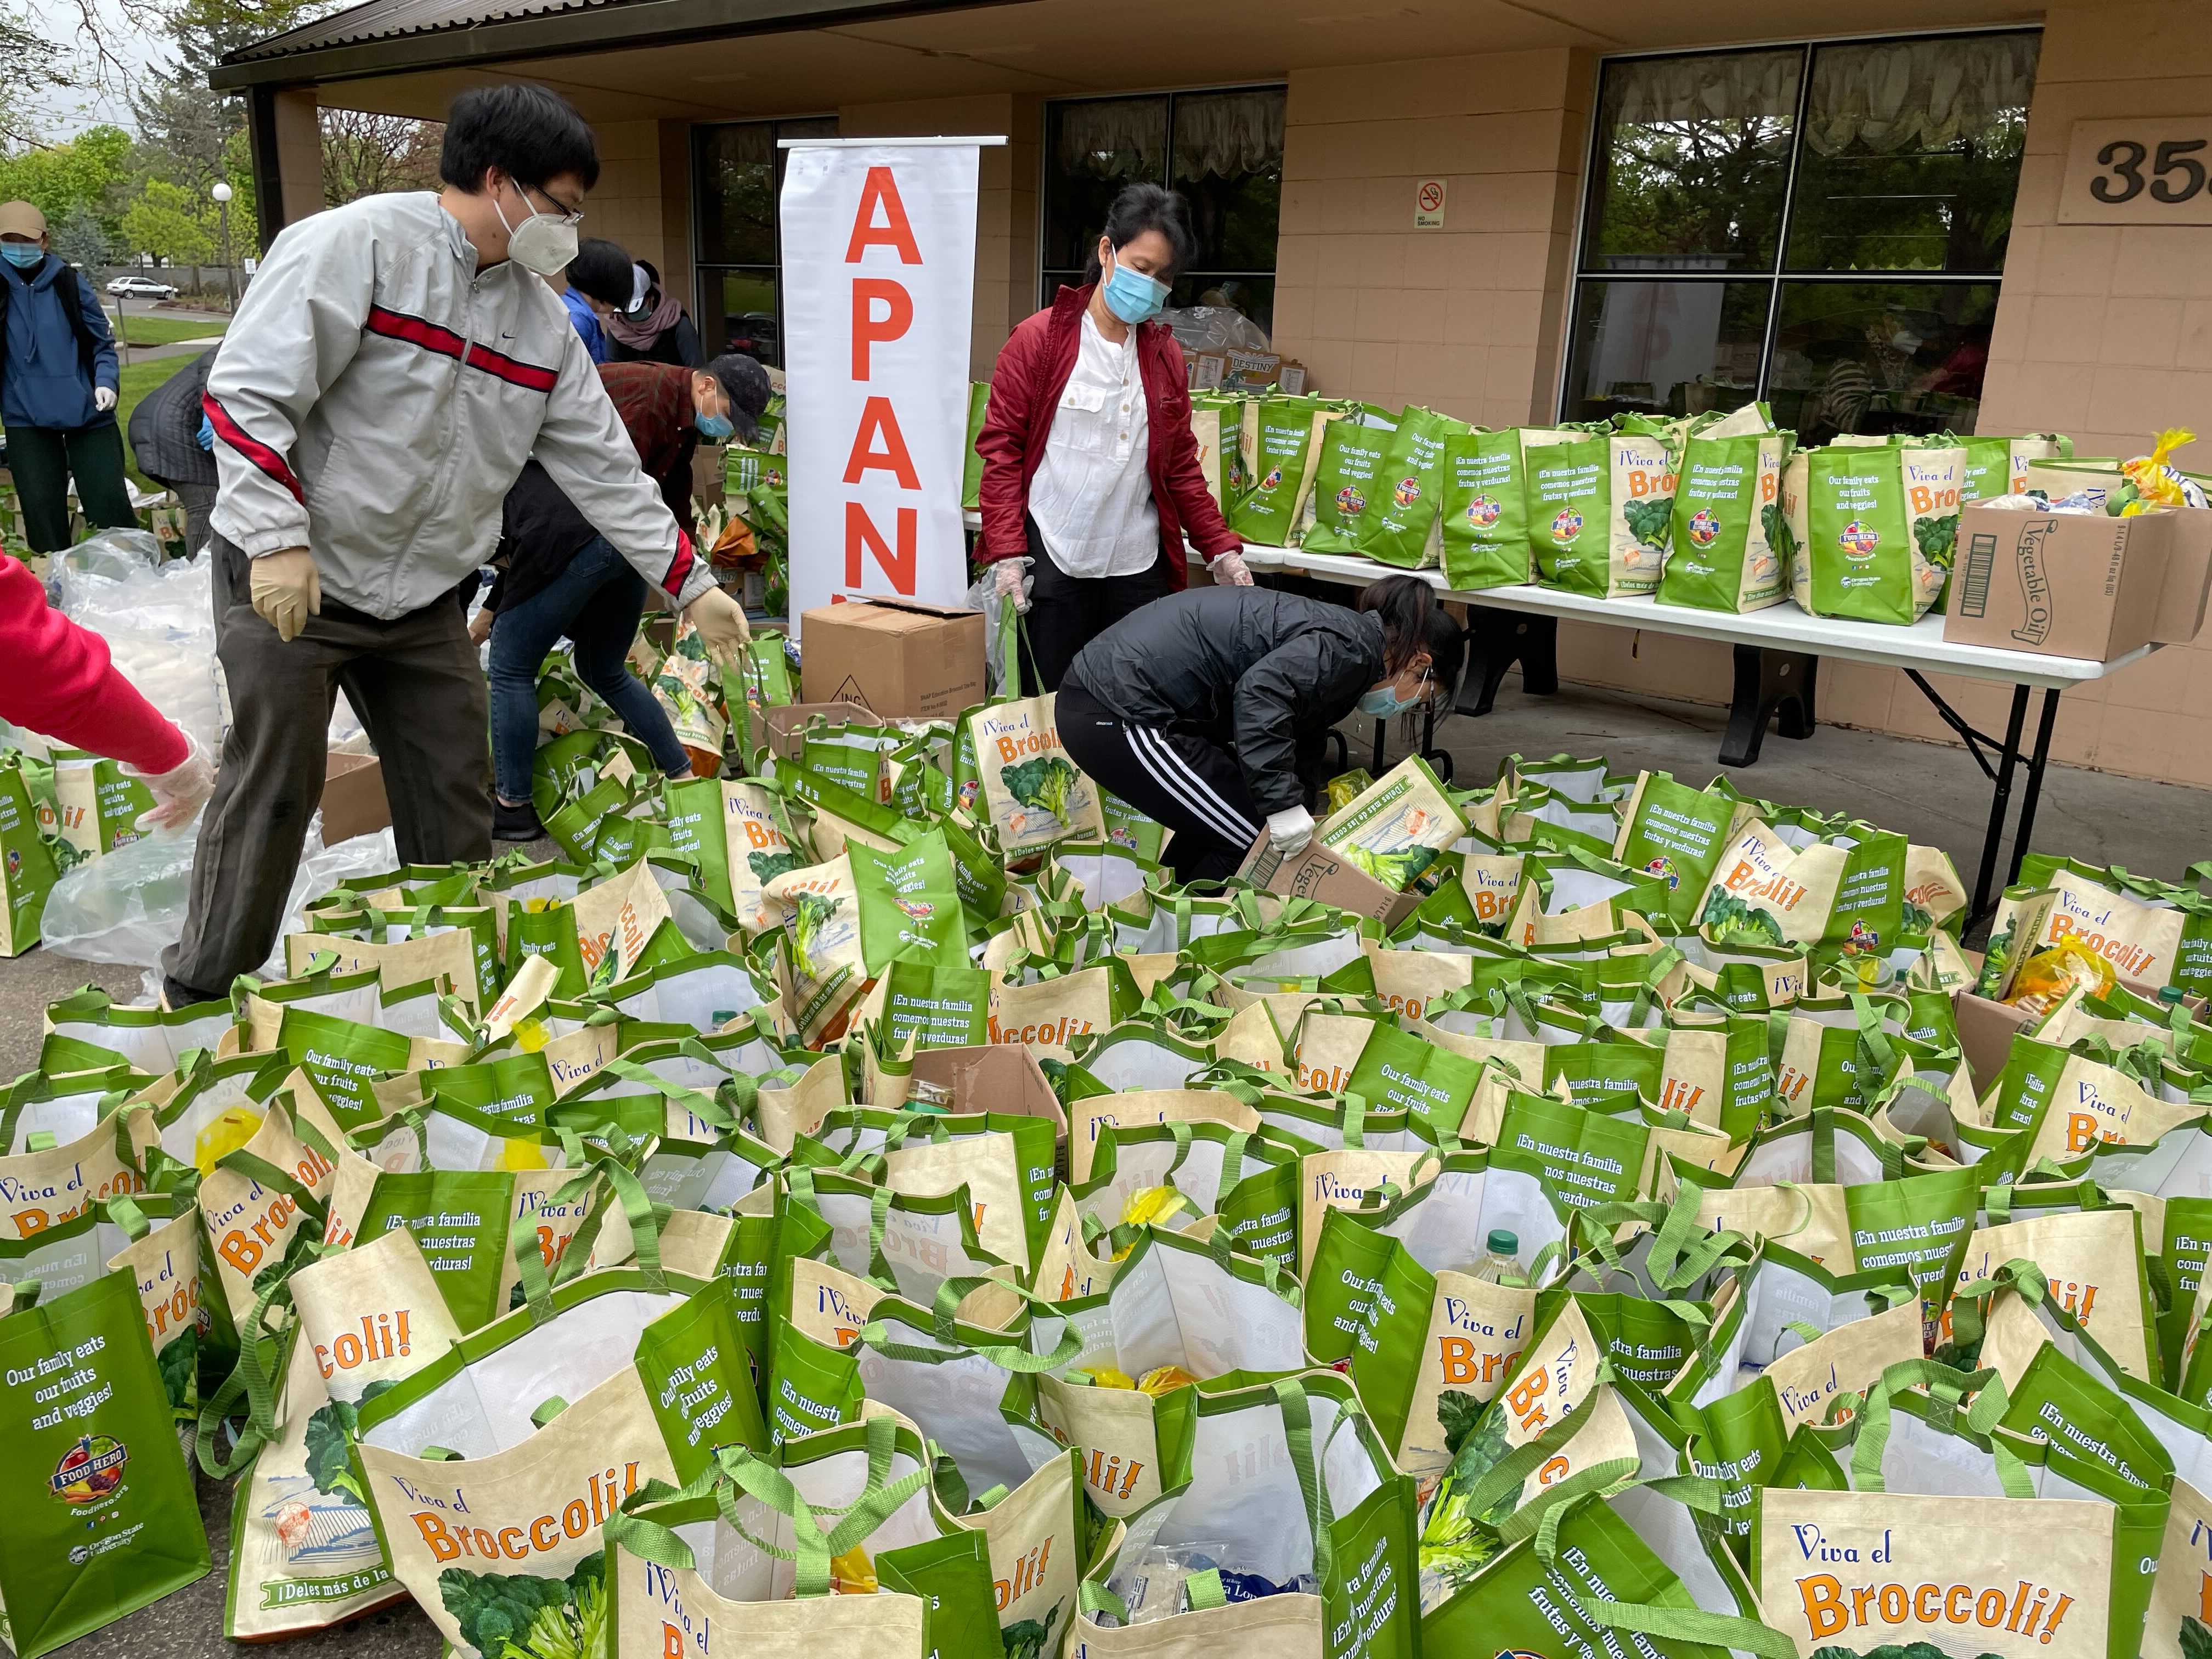 APANO staff prepares bags for their Communities United Fund